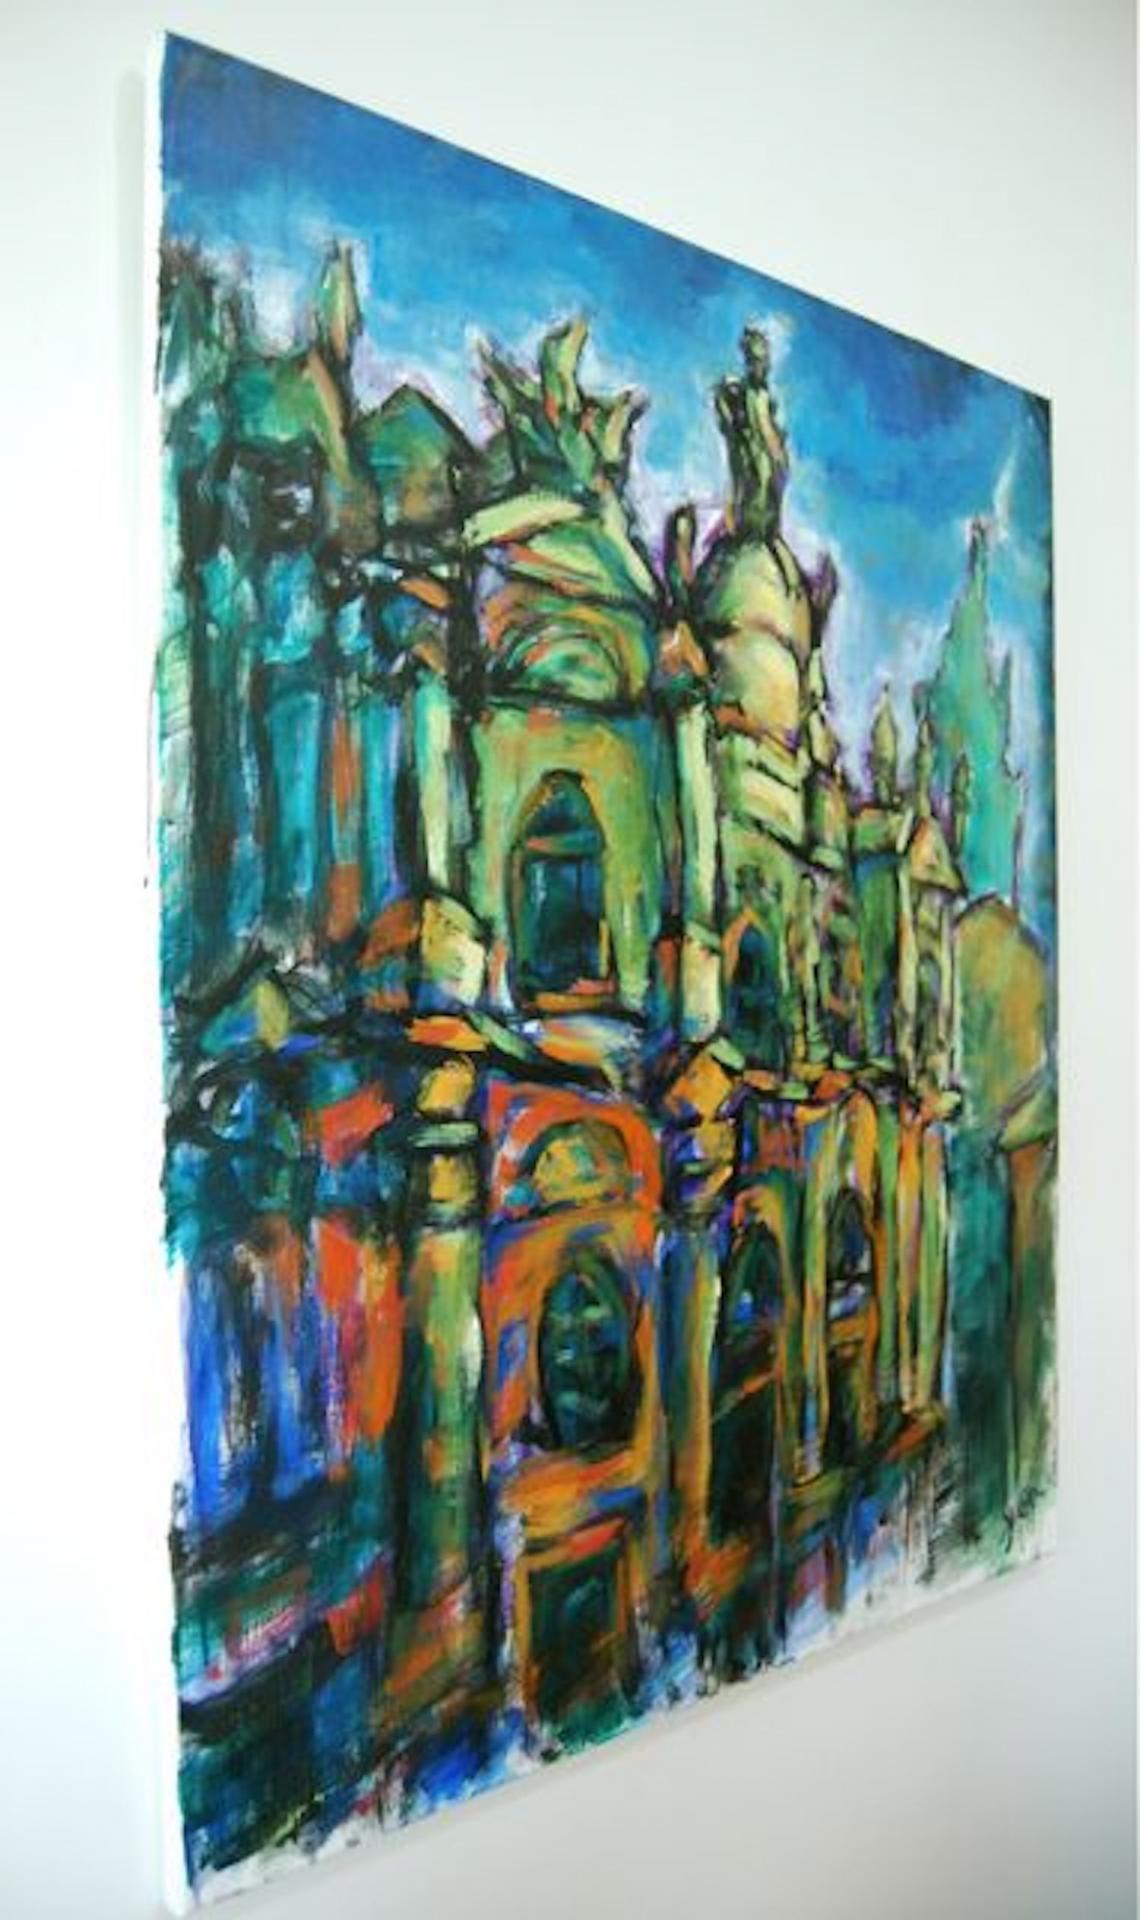 Destined -Spain Camino Oil Painting of Santiago de Compostela Cathedral, Way of St James original church art in Cezanne impressionist style